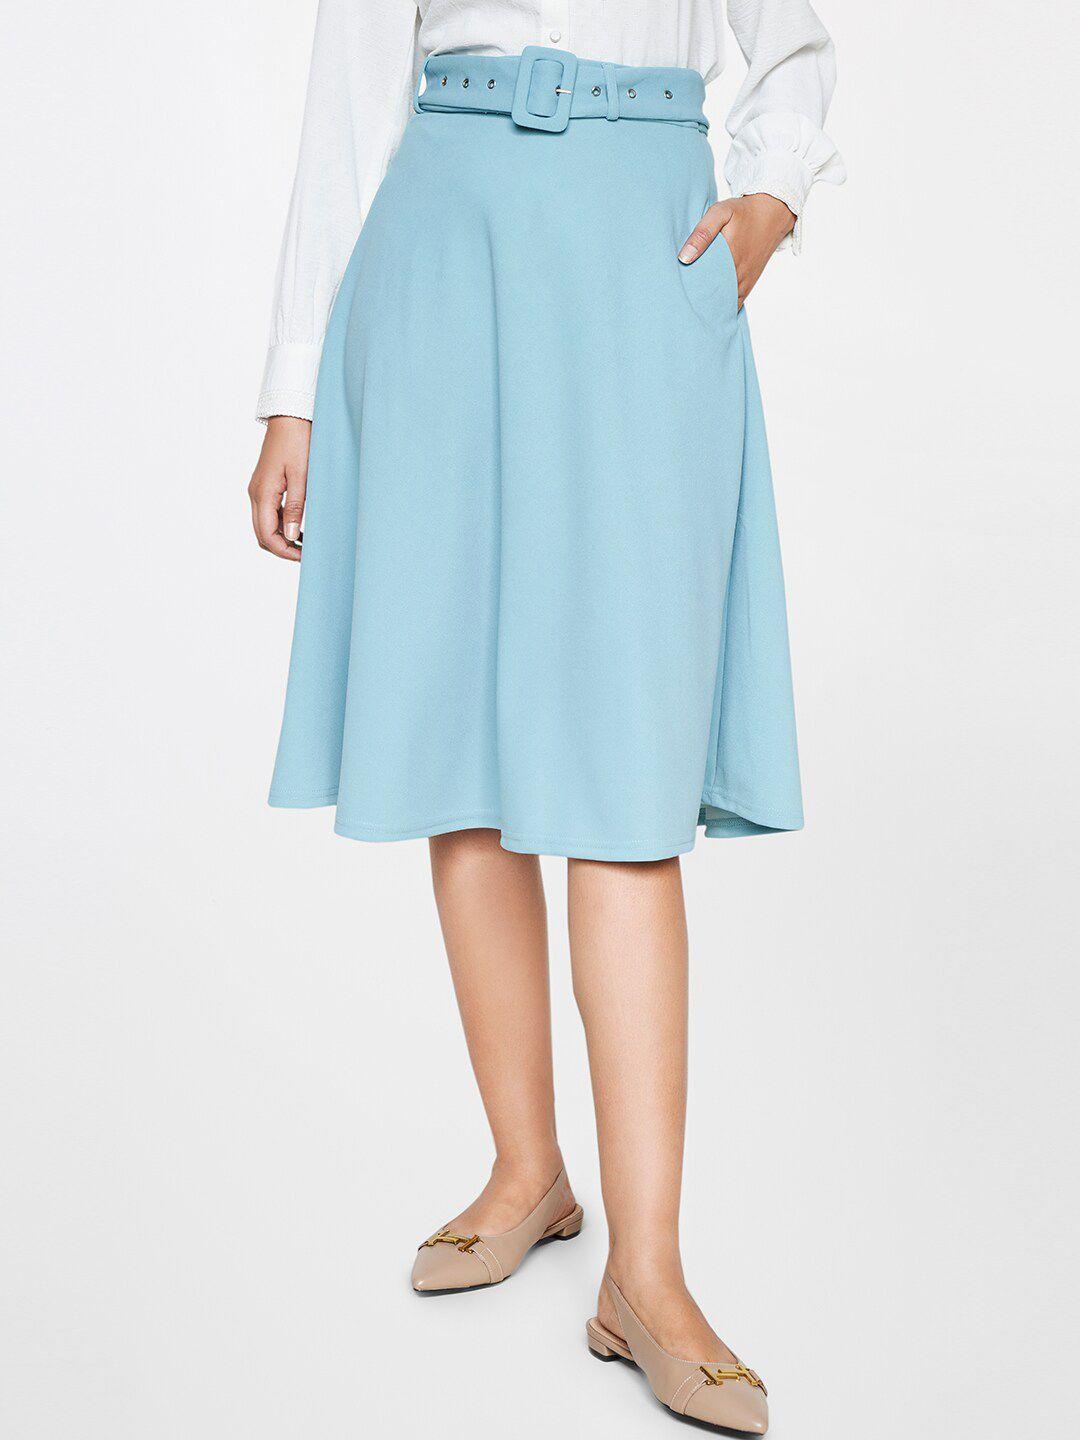 AND A-Line Midi Length Flared Skirt With Belt